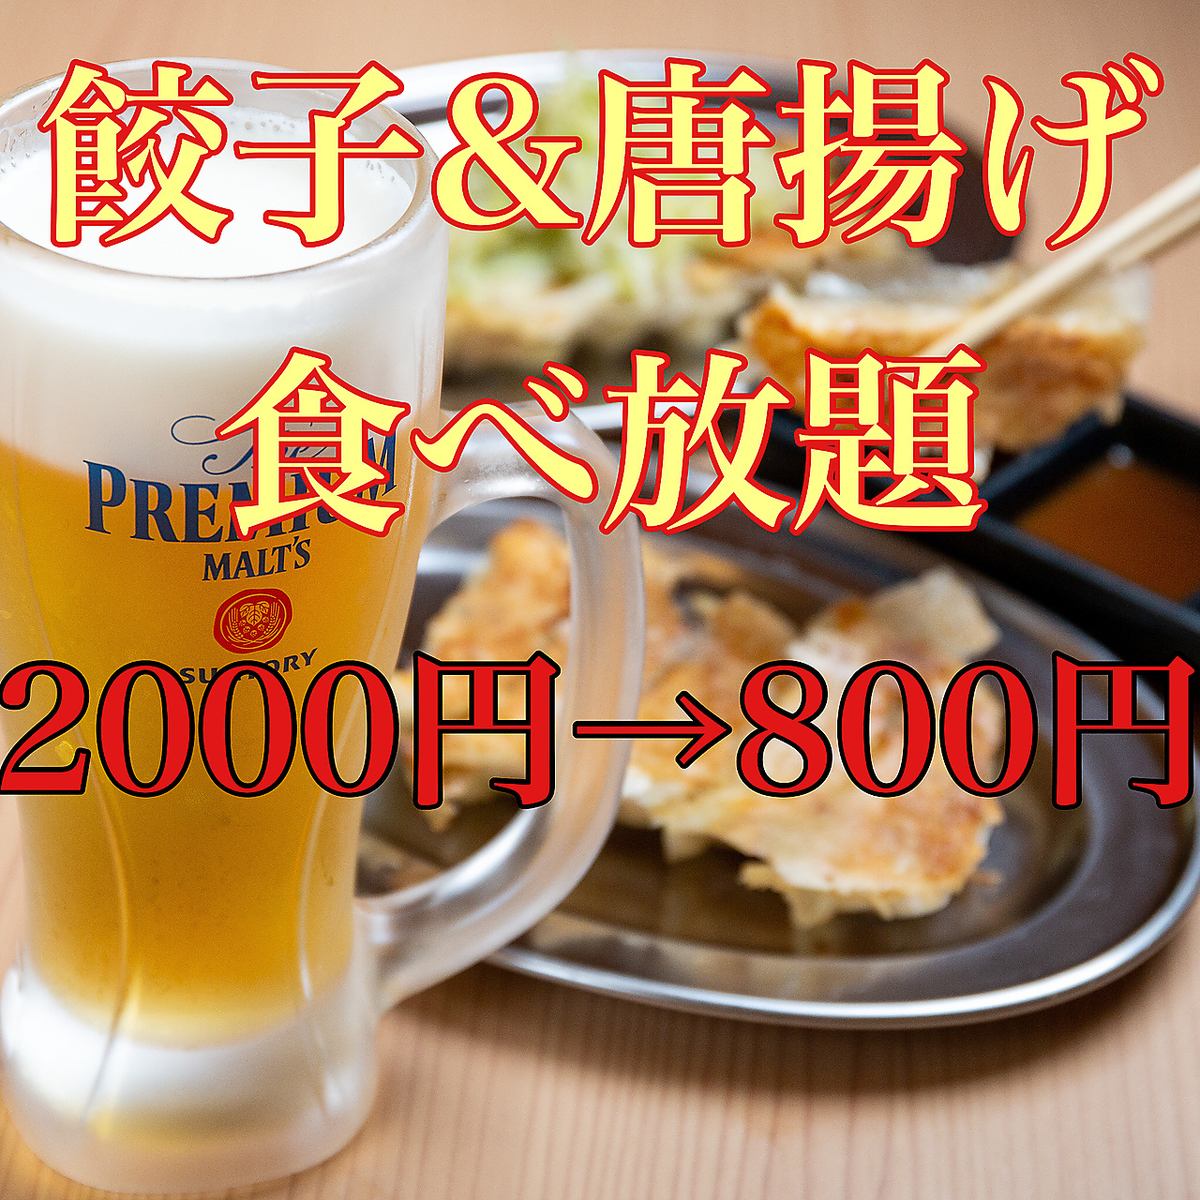 Reservation only●4 types of gyoza x 4 types of fried chicken all you can eat 2000 yen → 800 yen●